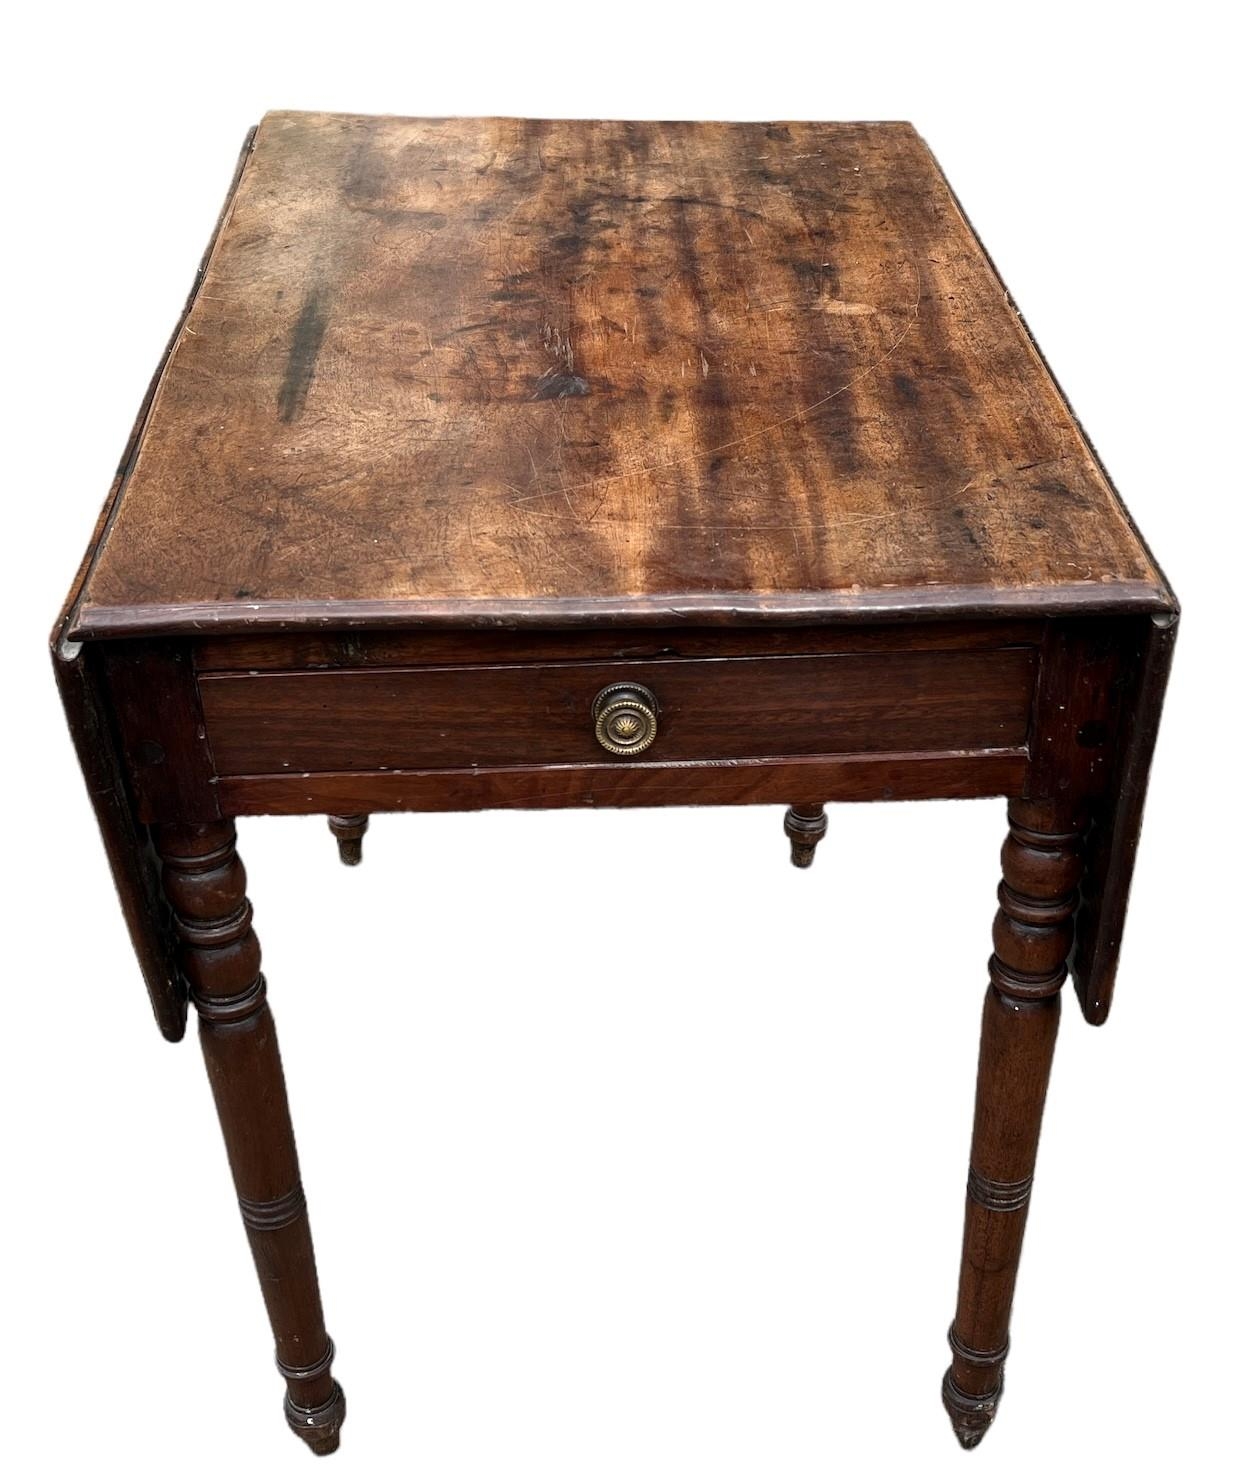 A 19TH CENTURY SOLID MAHOGANY PEMBROKE TABLE With a single drawer, raised on turned legs. (h 72cm